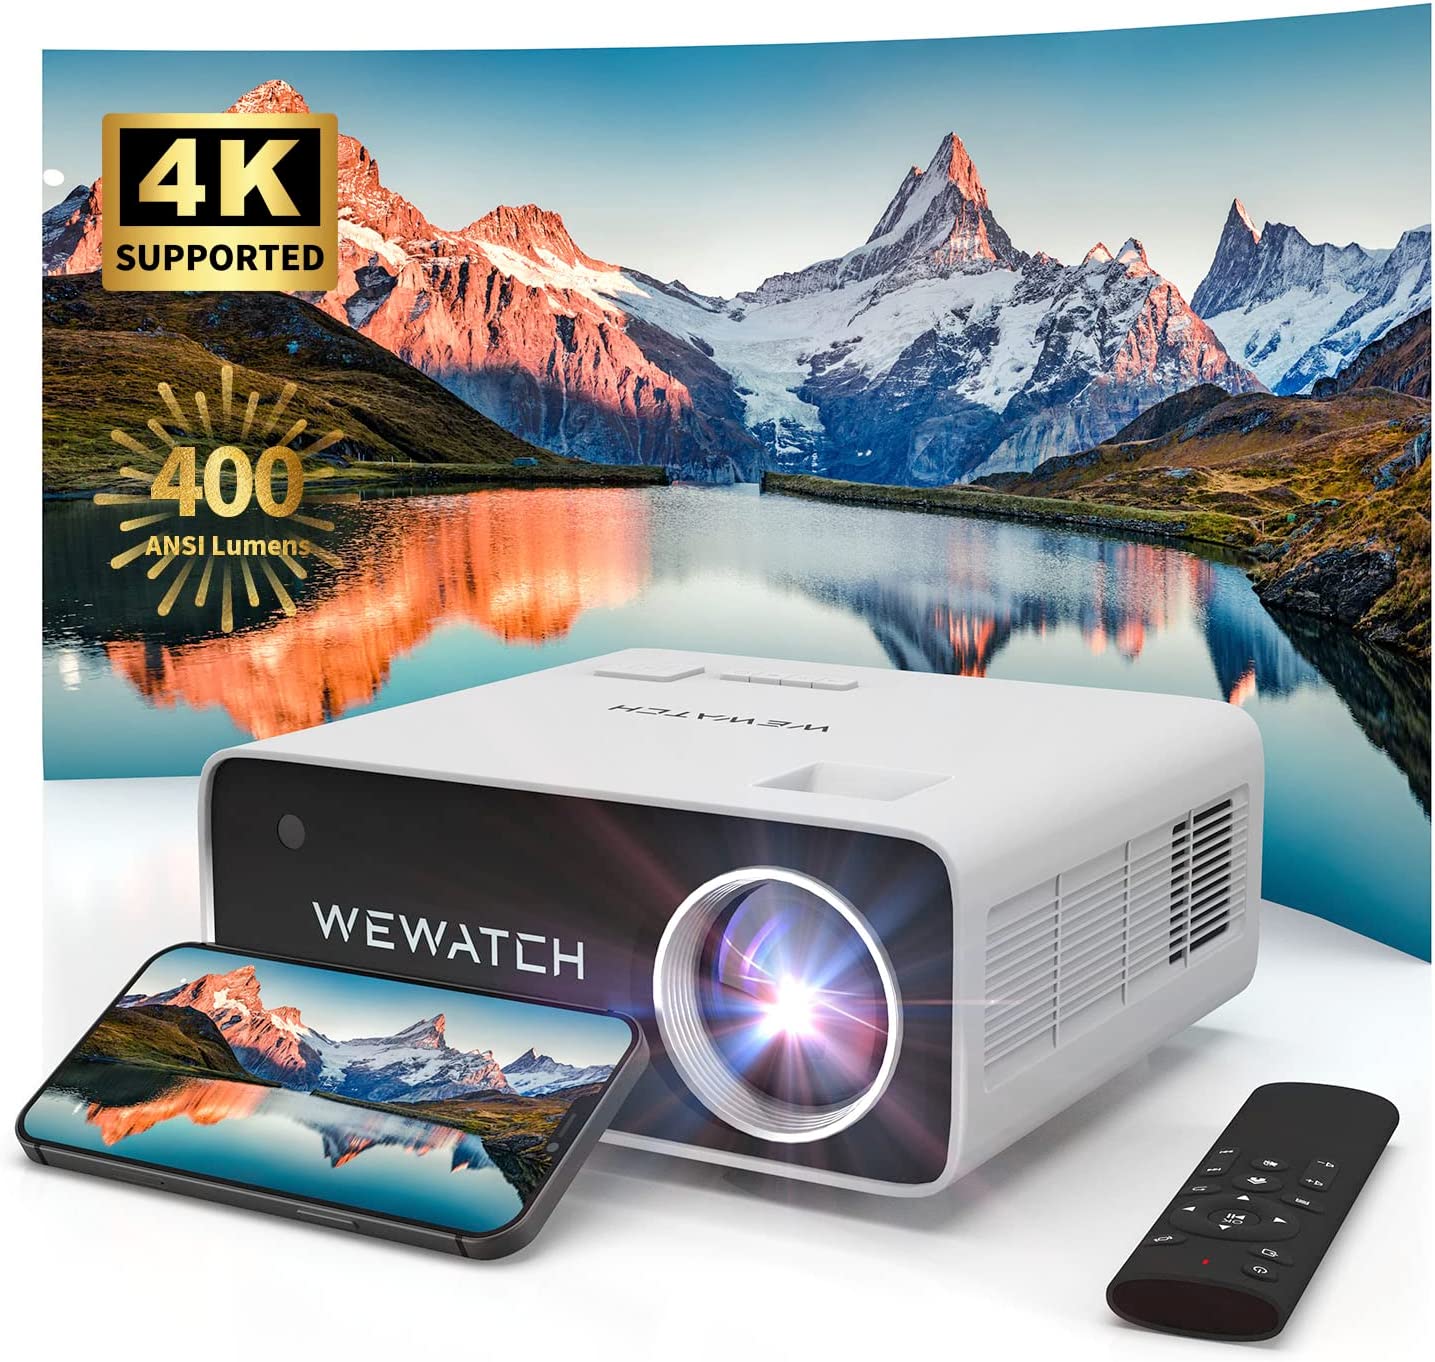 WEWATCH Announces World's 1st 4K LED Video Projector with White Noise Feature for Heathy Sleep And Meditation